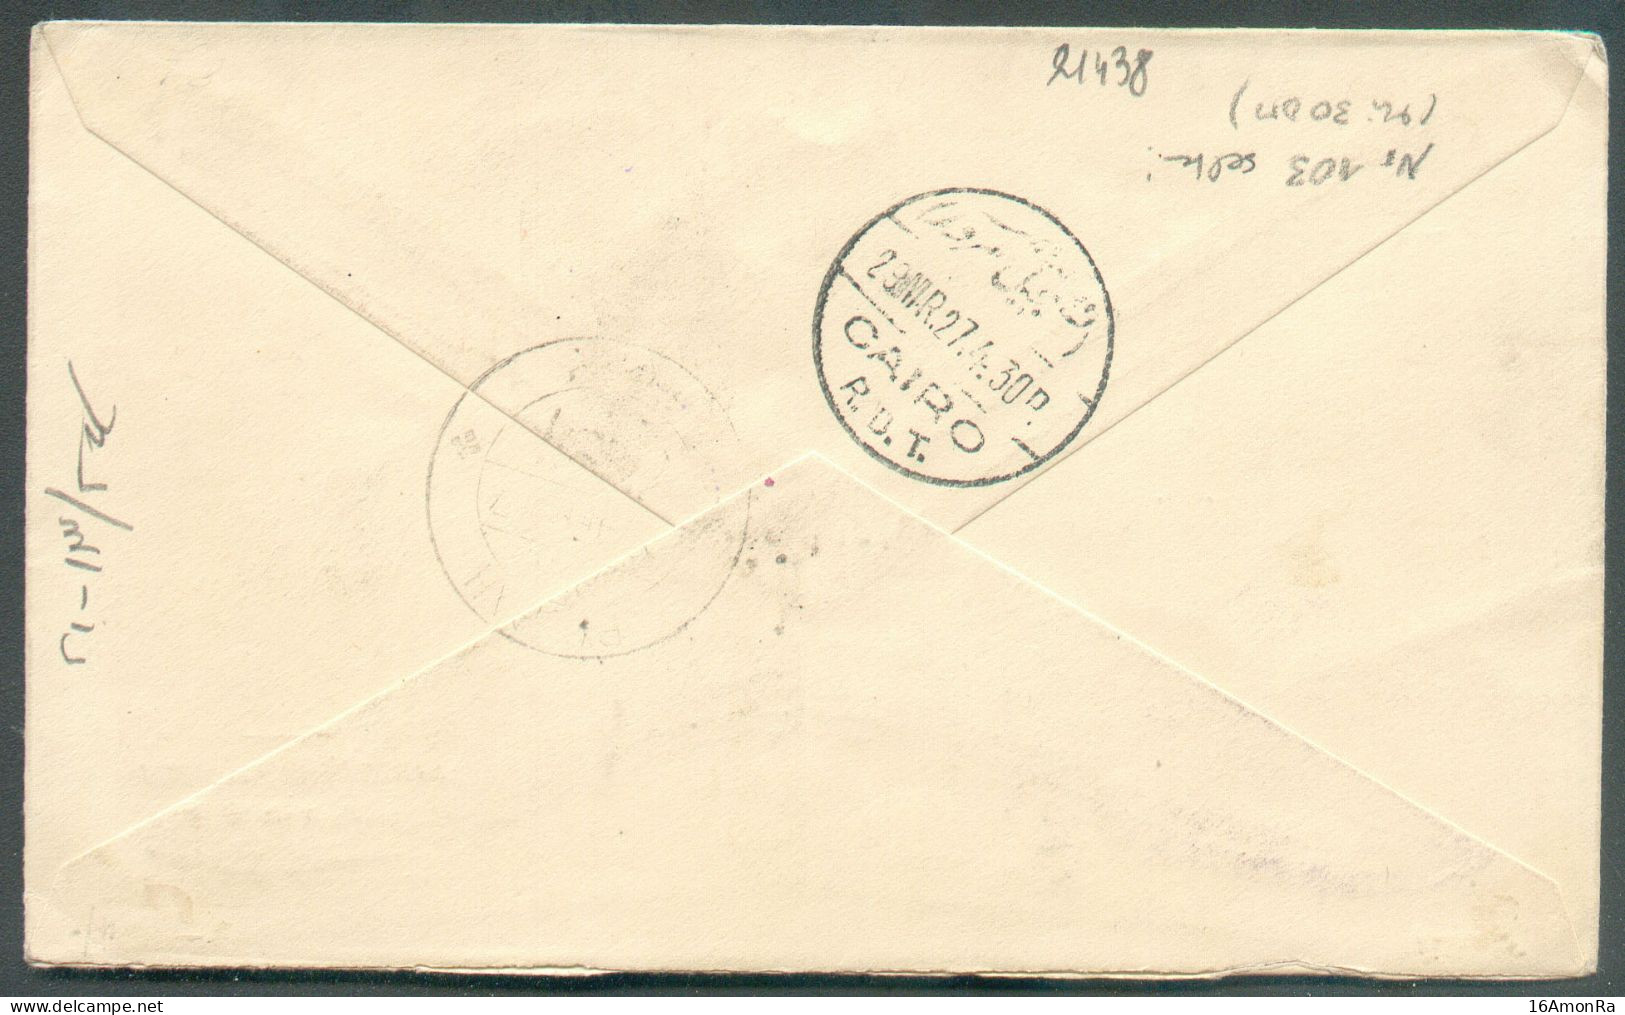 27pi PA. + Issue CONGRES INTERNATIONAL DU COTON 1927 Cacn. ALEXANDRIA On Regisetred Cover + Air Mail 29 March 1927 To Ba - Airmail